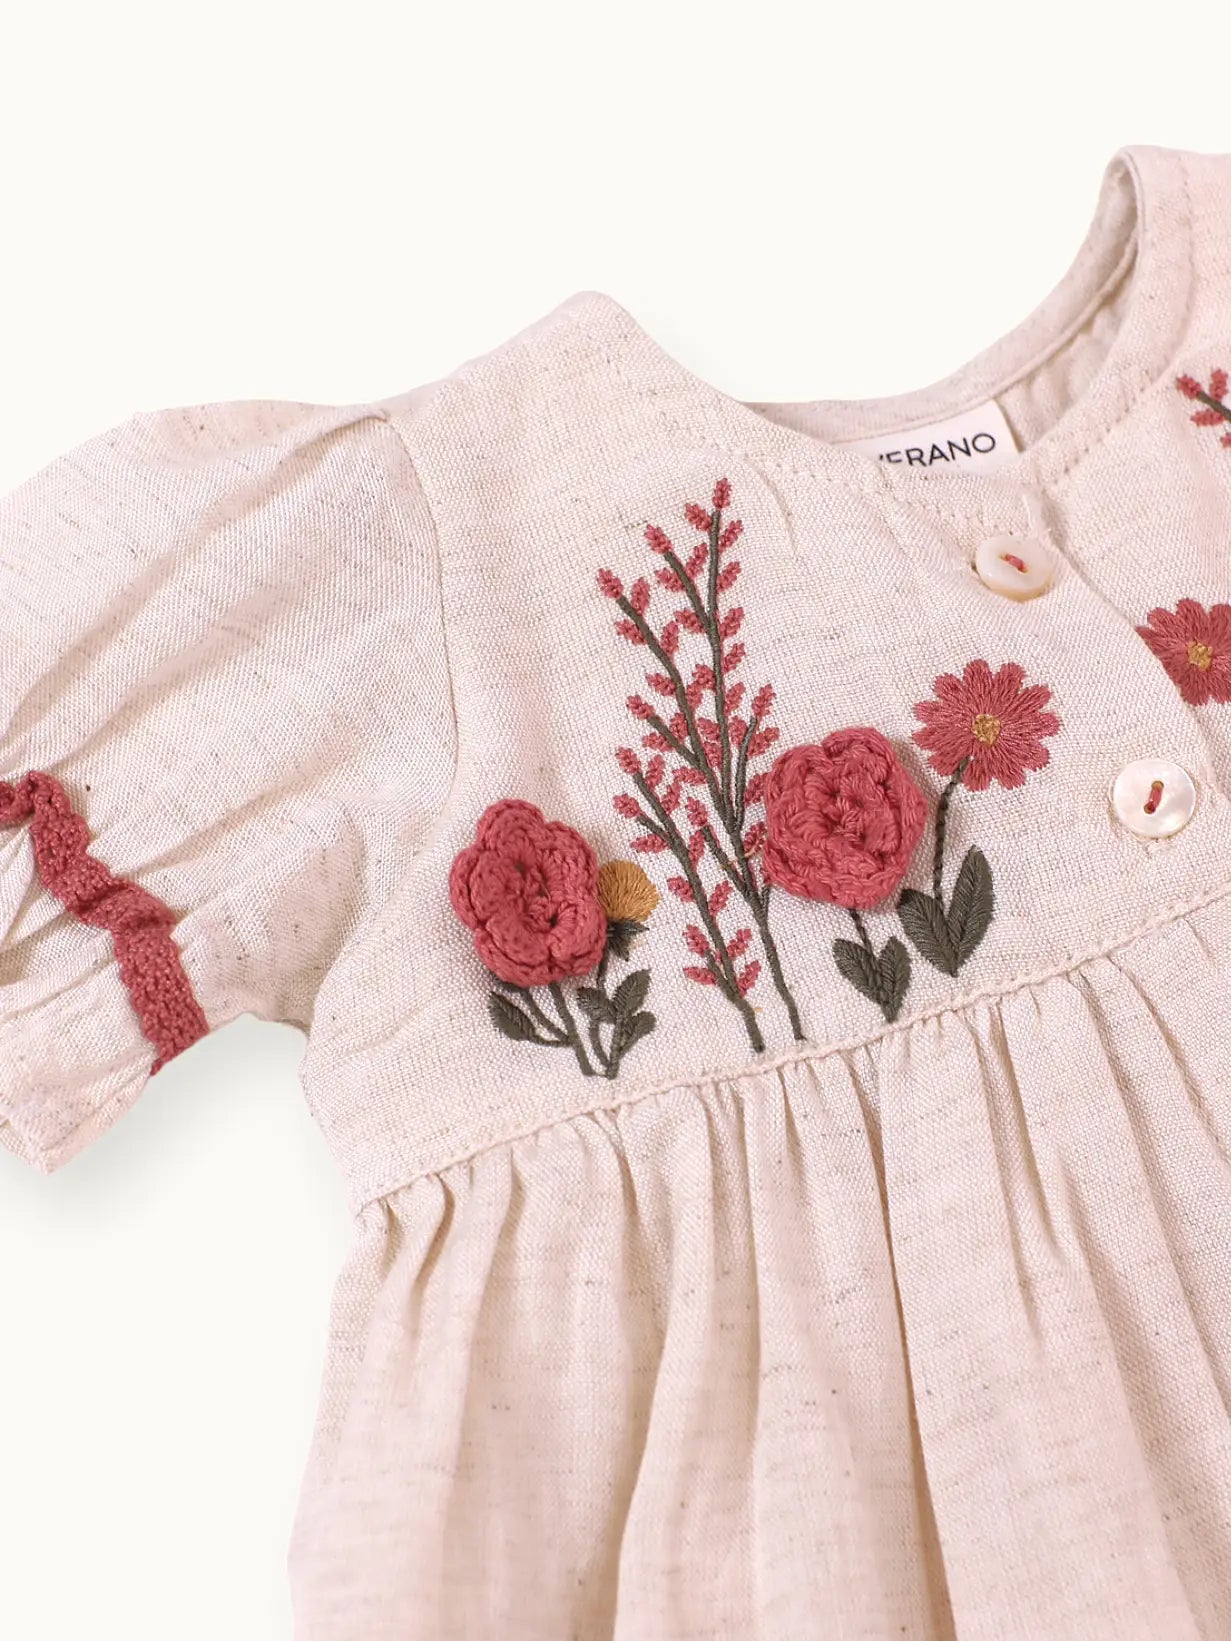 Viverano Organics Victoria Embroidered Floral Baby Dress + Bloomer (Linen) - Natural